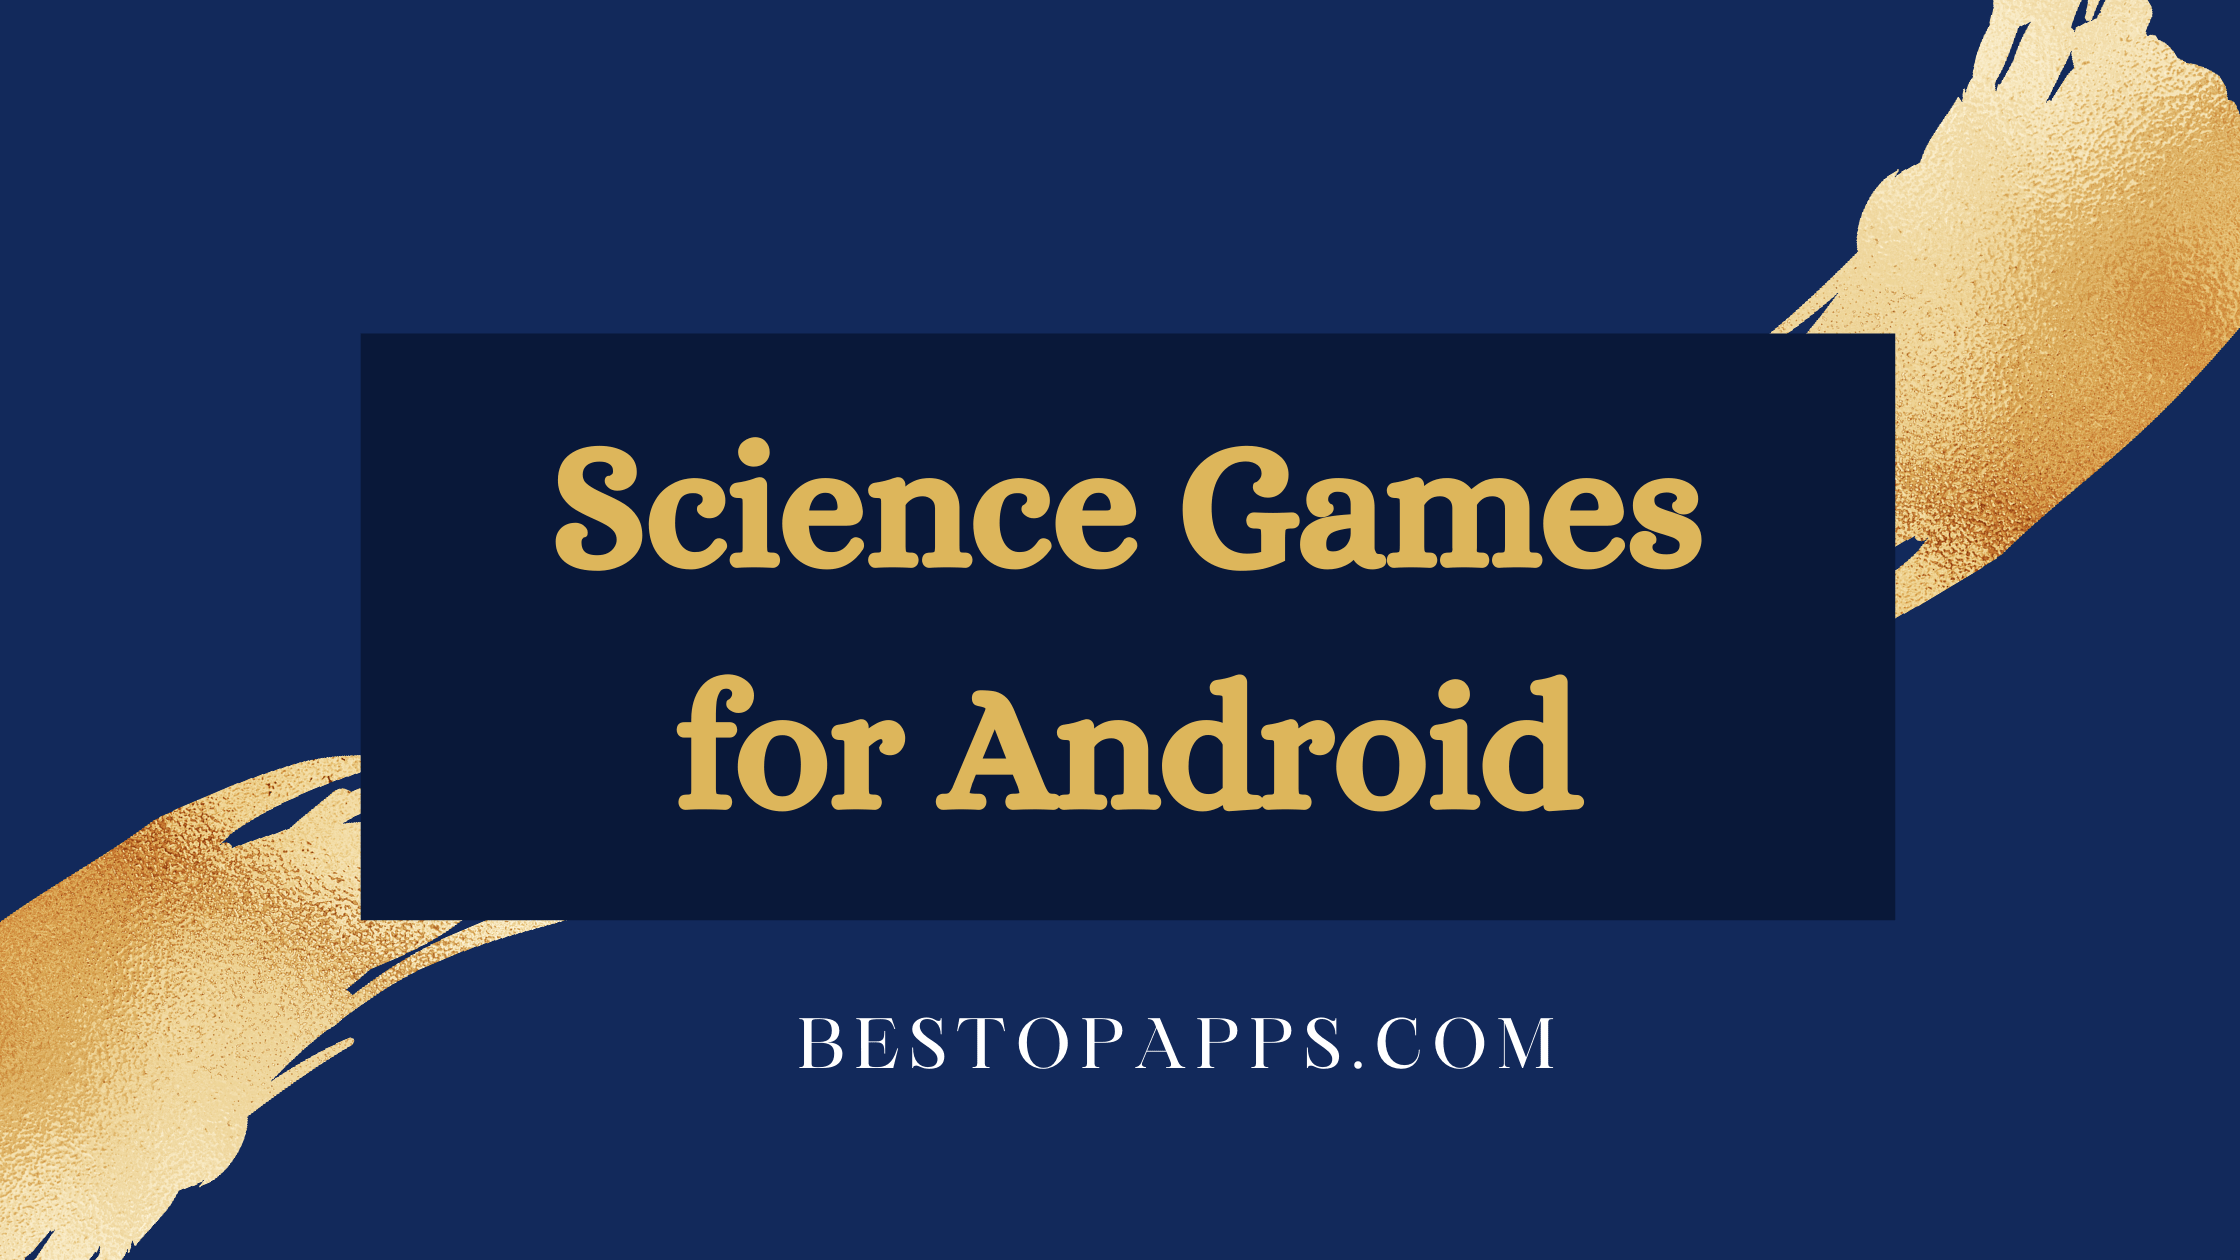 Science Games for Android